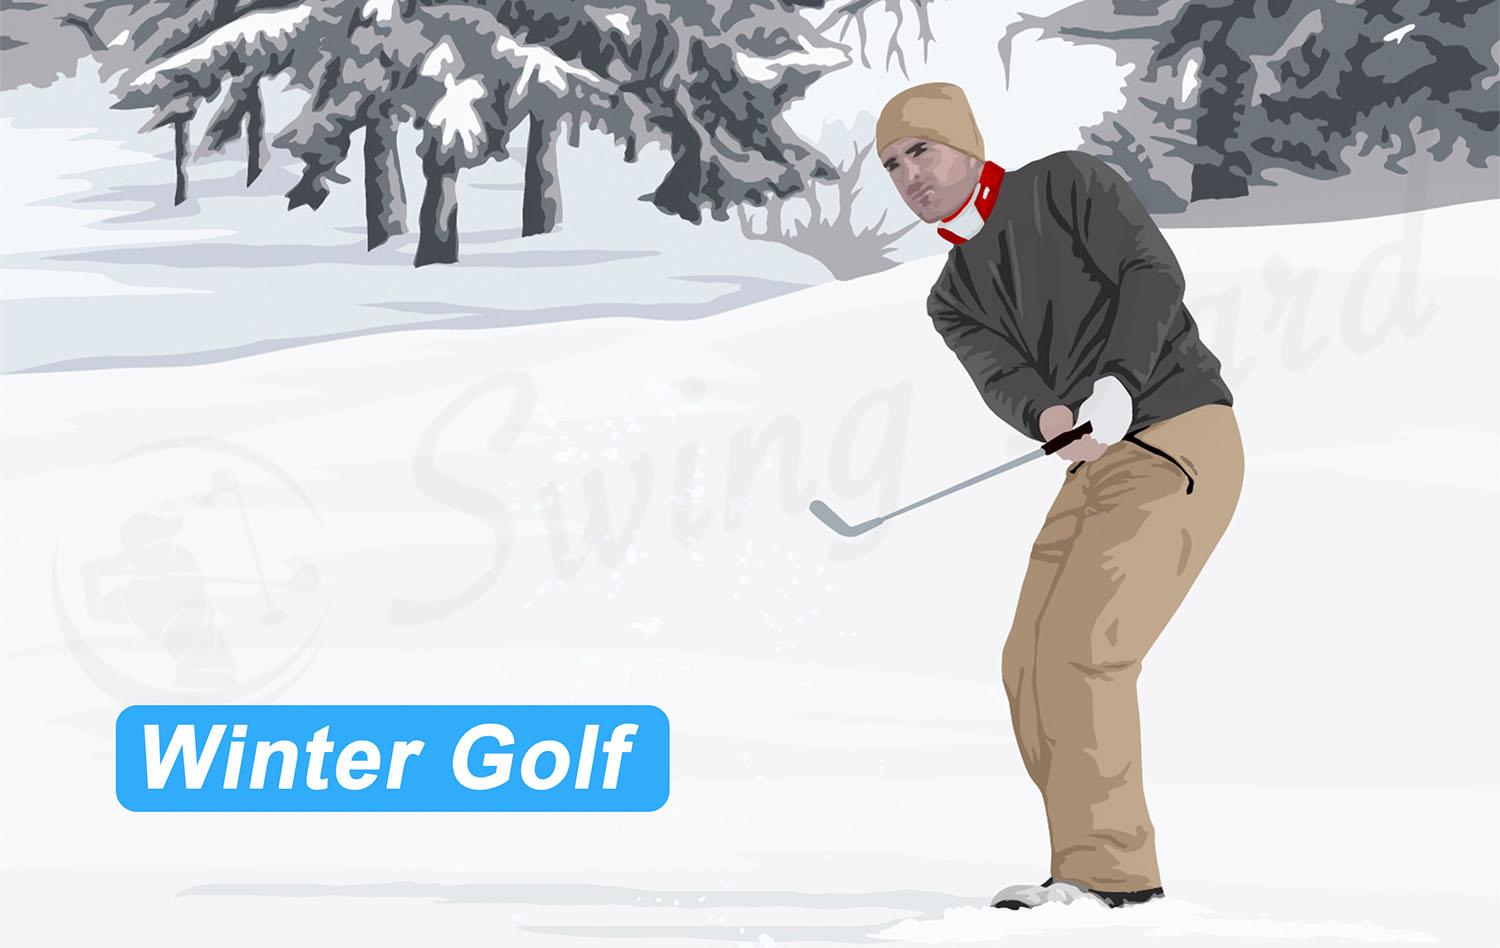 A guy playing winter golf